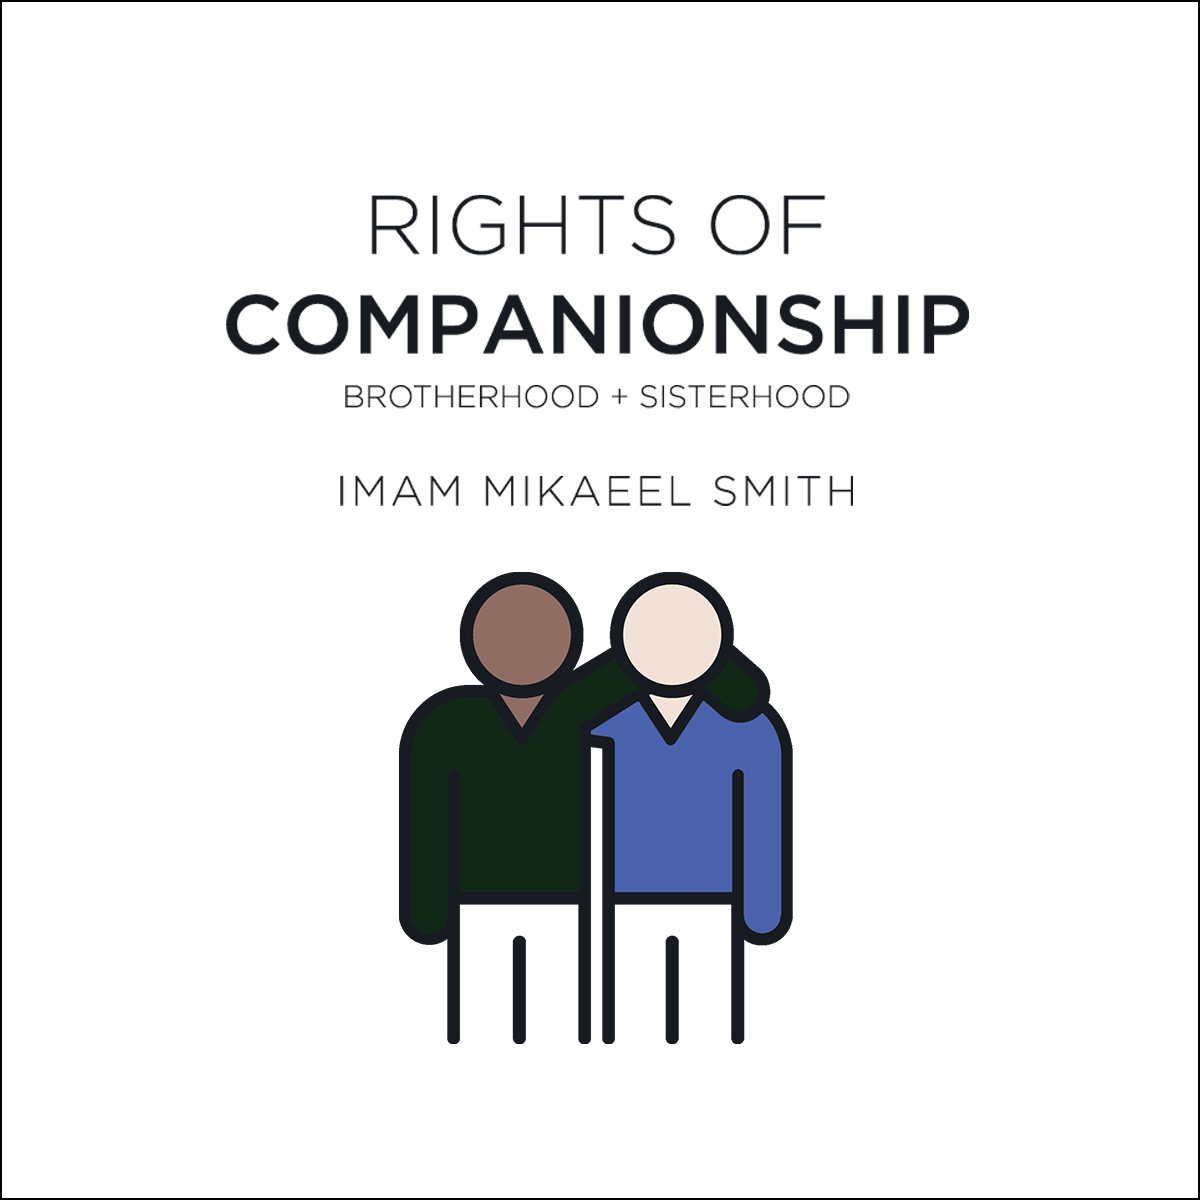 Rights of Companionship: EP9 – Final